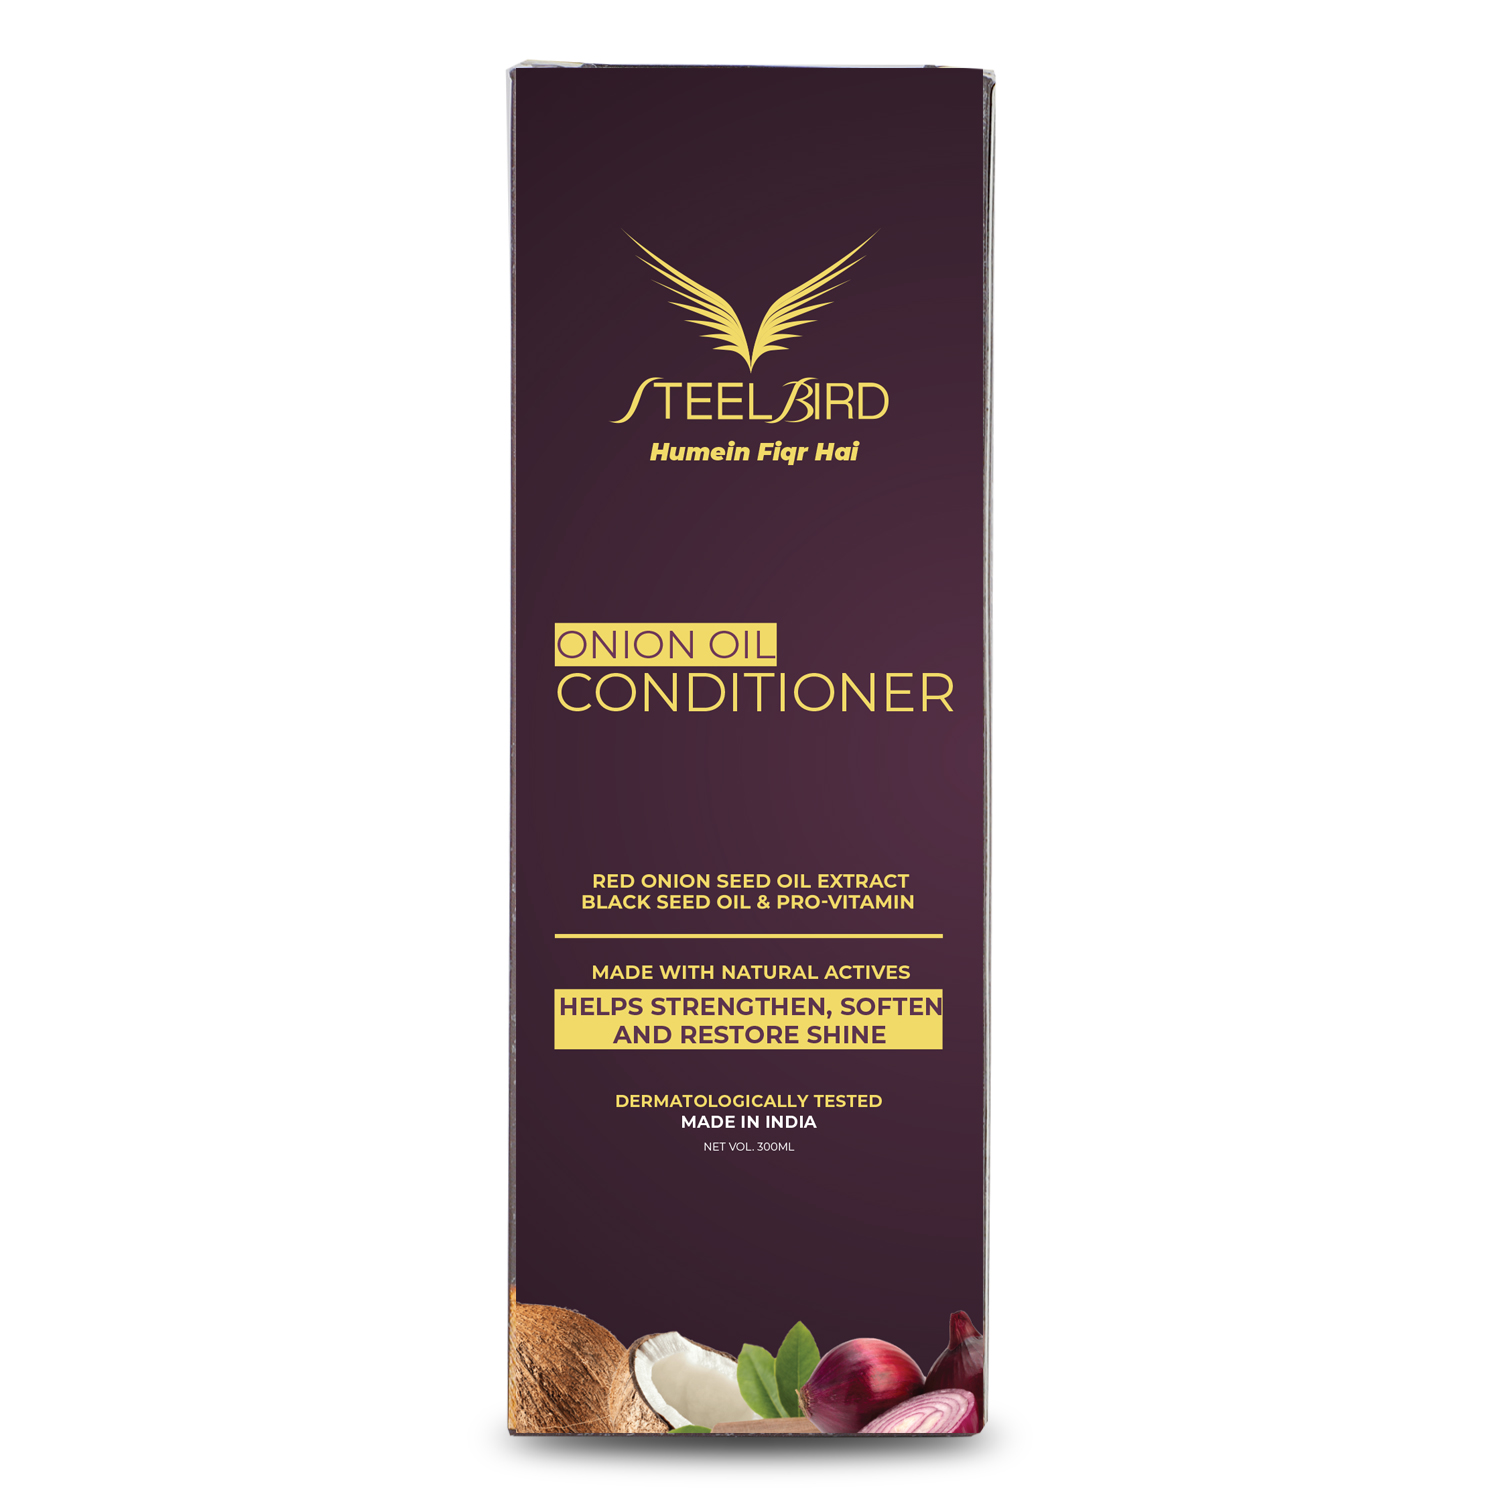 Steelbird Hair Care Onion Conditioner With Red Onion Seed Oil Extract, Black Seed Oil & Pro-Vitamin B5 - No Parabens, Mineral Oil, Silicones, Color & Peg - 300 Ml